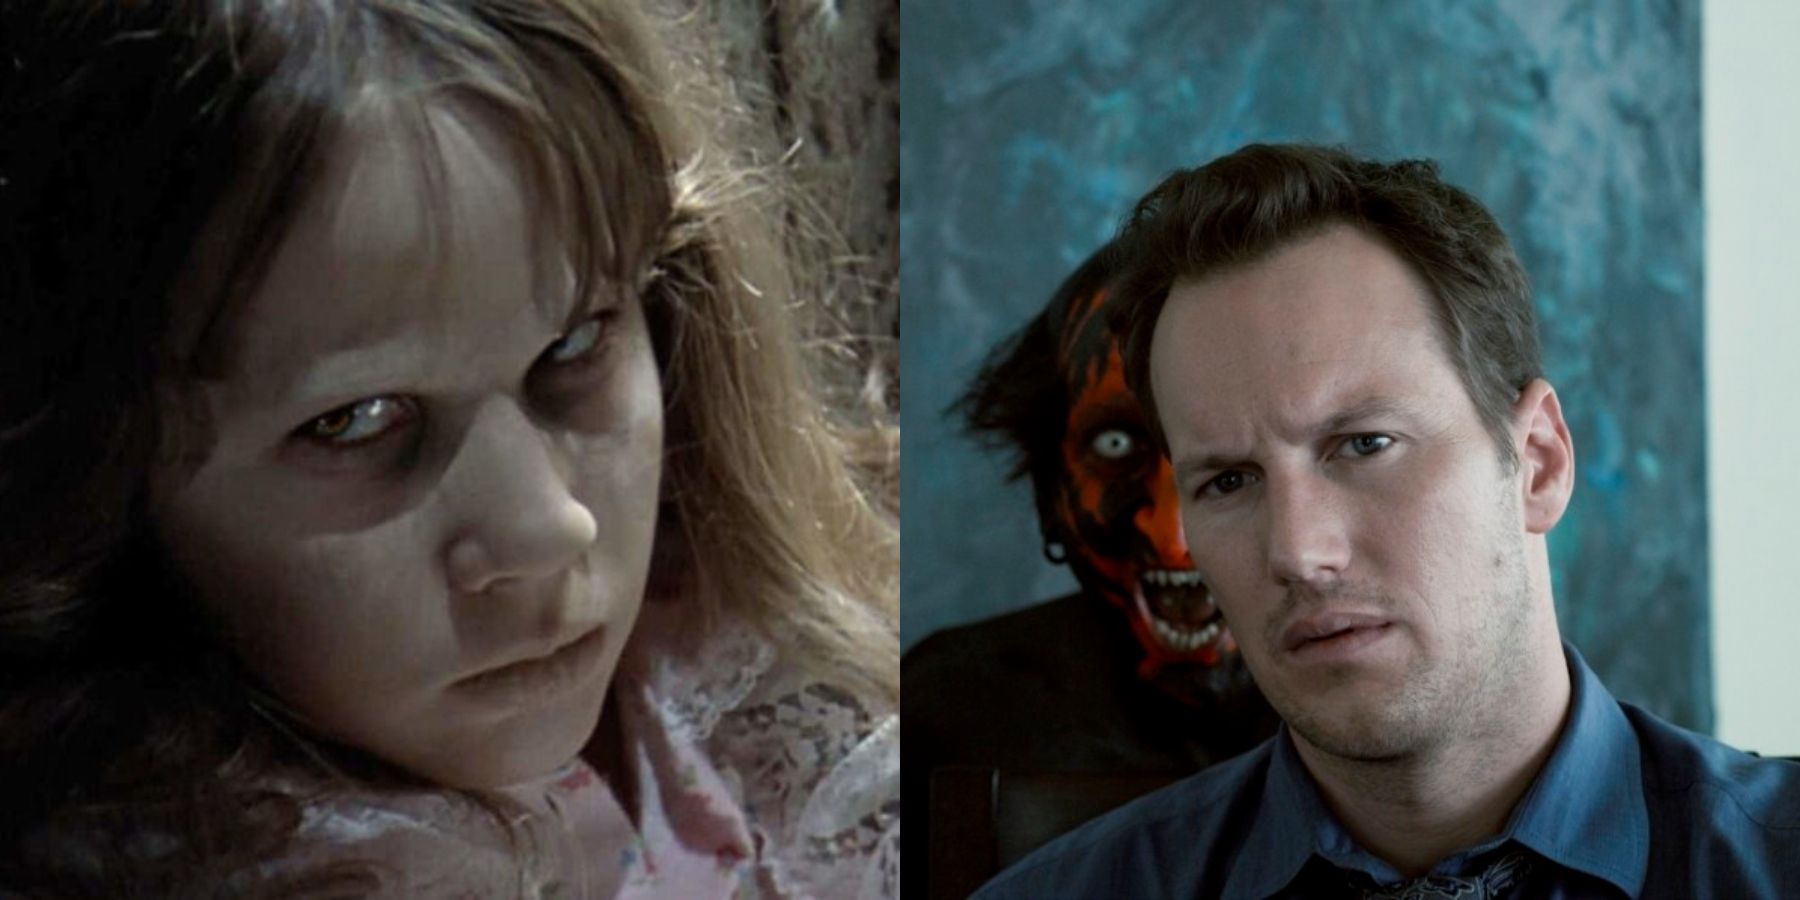 Split image of Linda Blair in The Exorcist and Patrick Wilson in Insidious